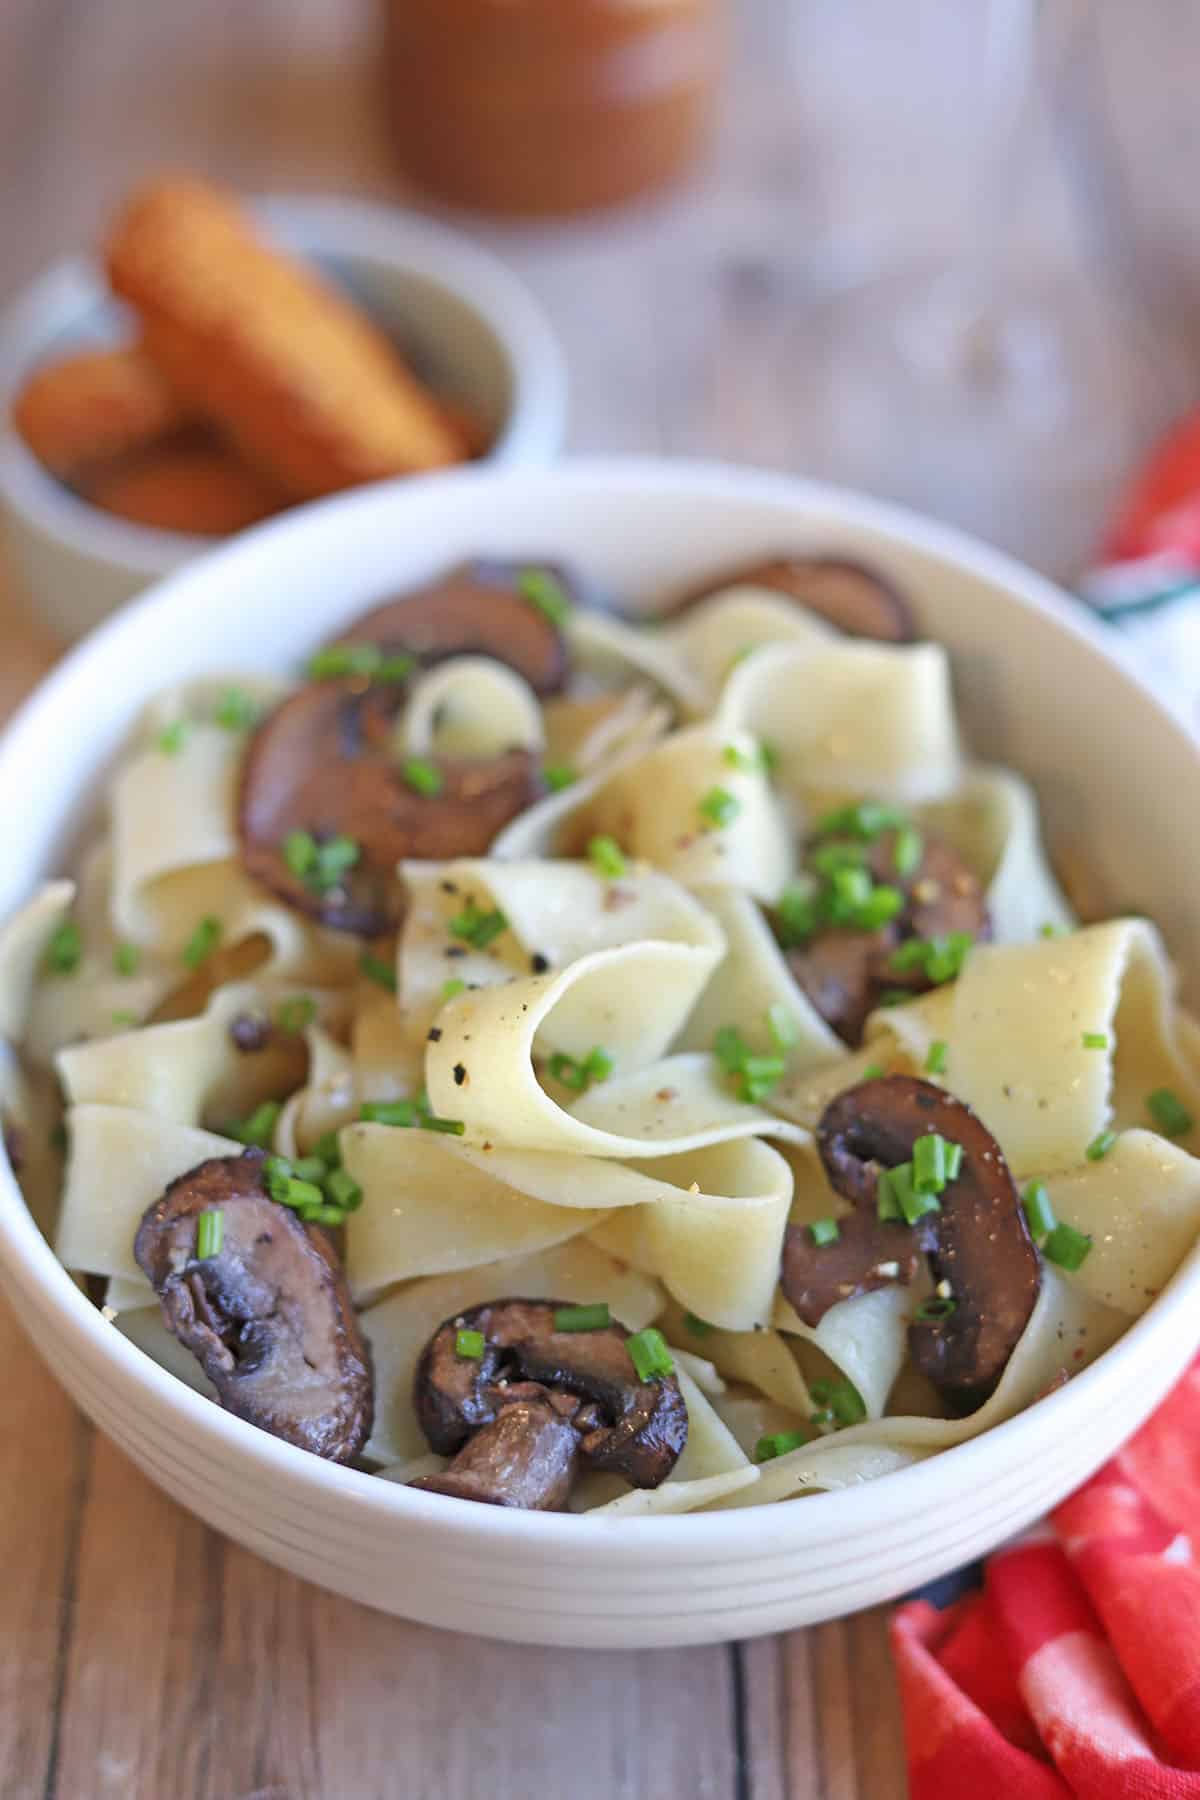 Bowl of vegan buttered noodles with red wine mushrooms.